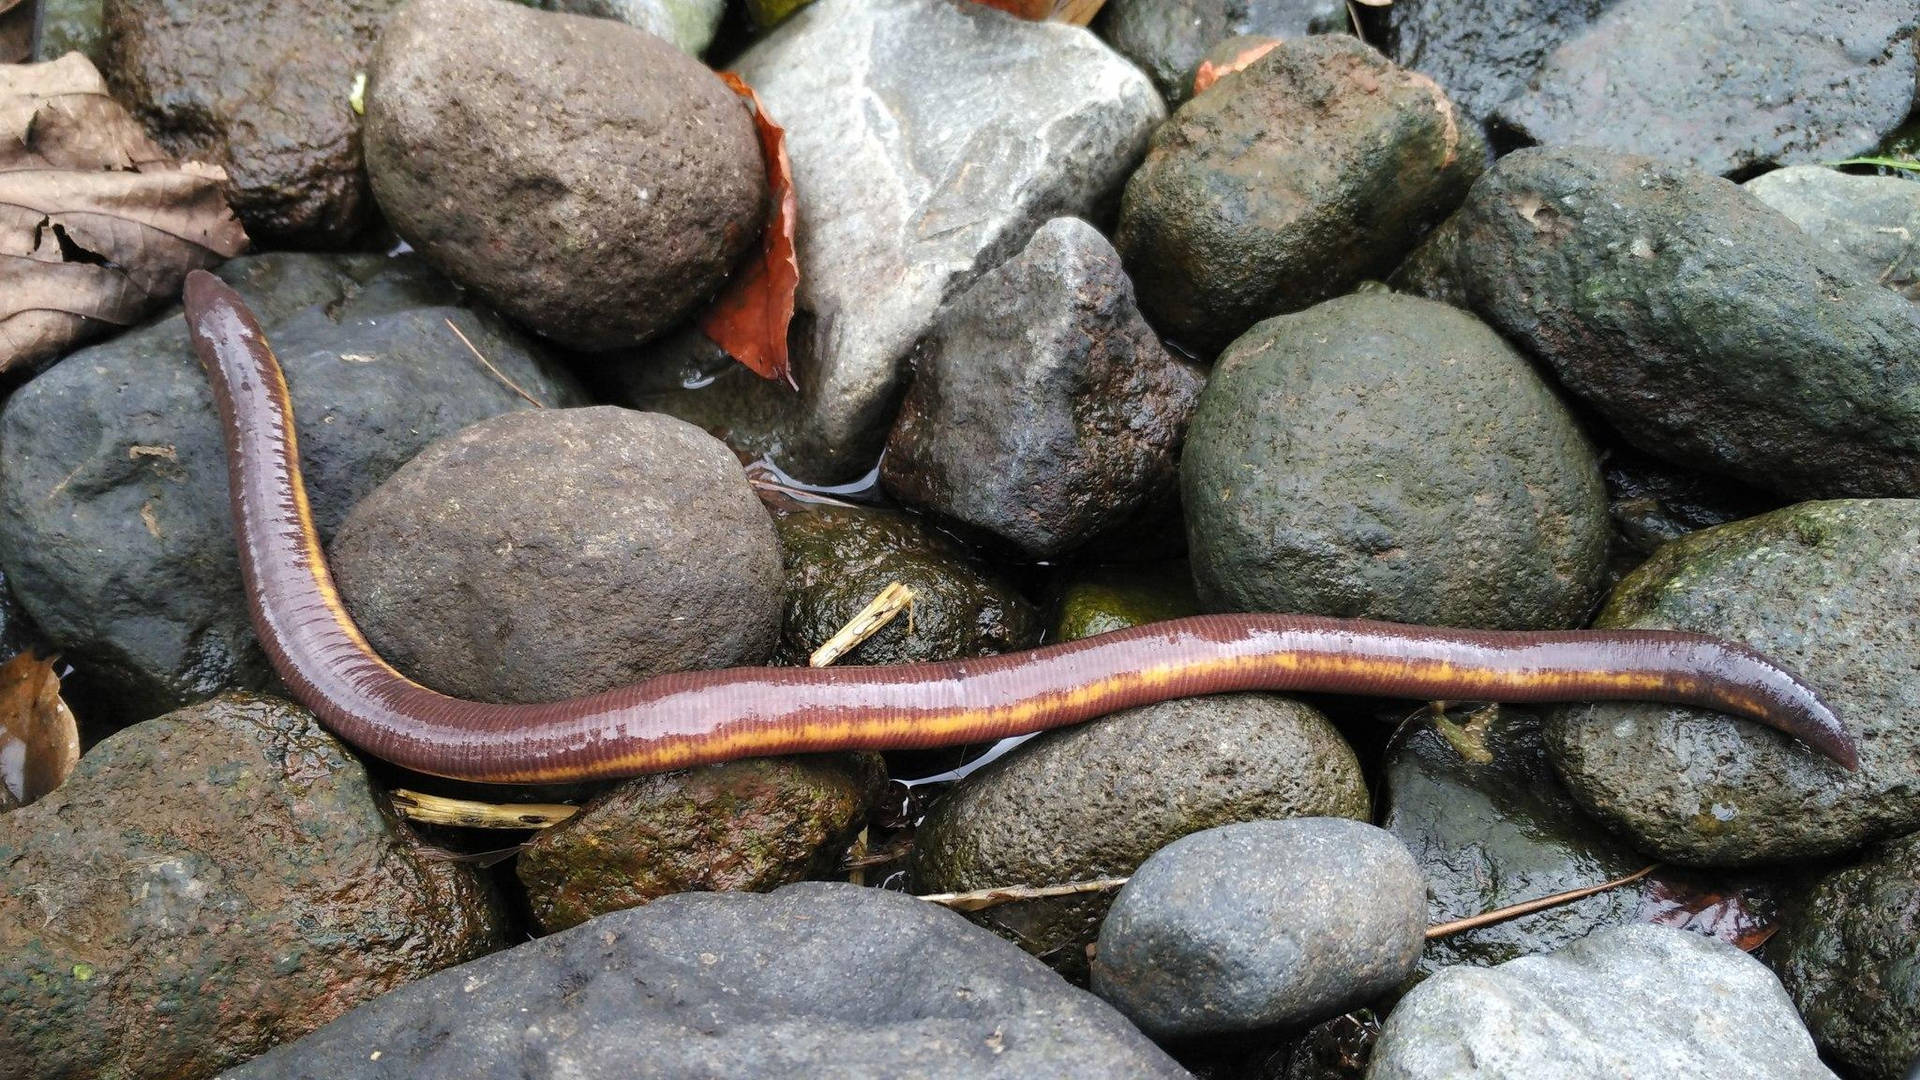 Close-up view of a Caecilian, an earthworm lookalike, crawling on rocks. Wallpaper